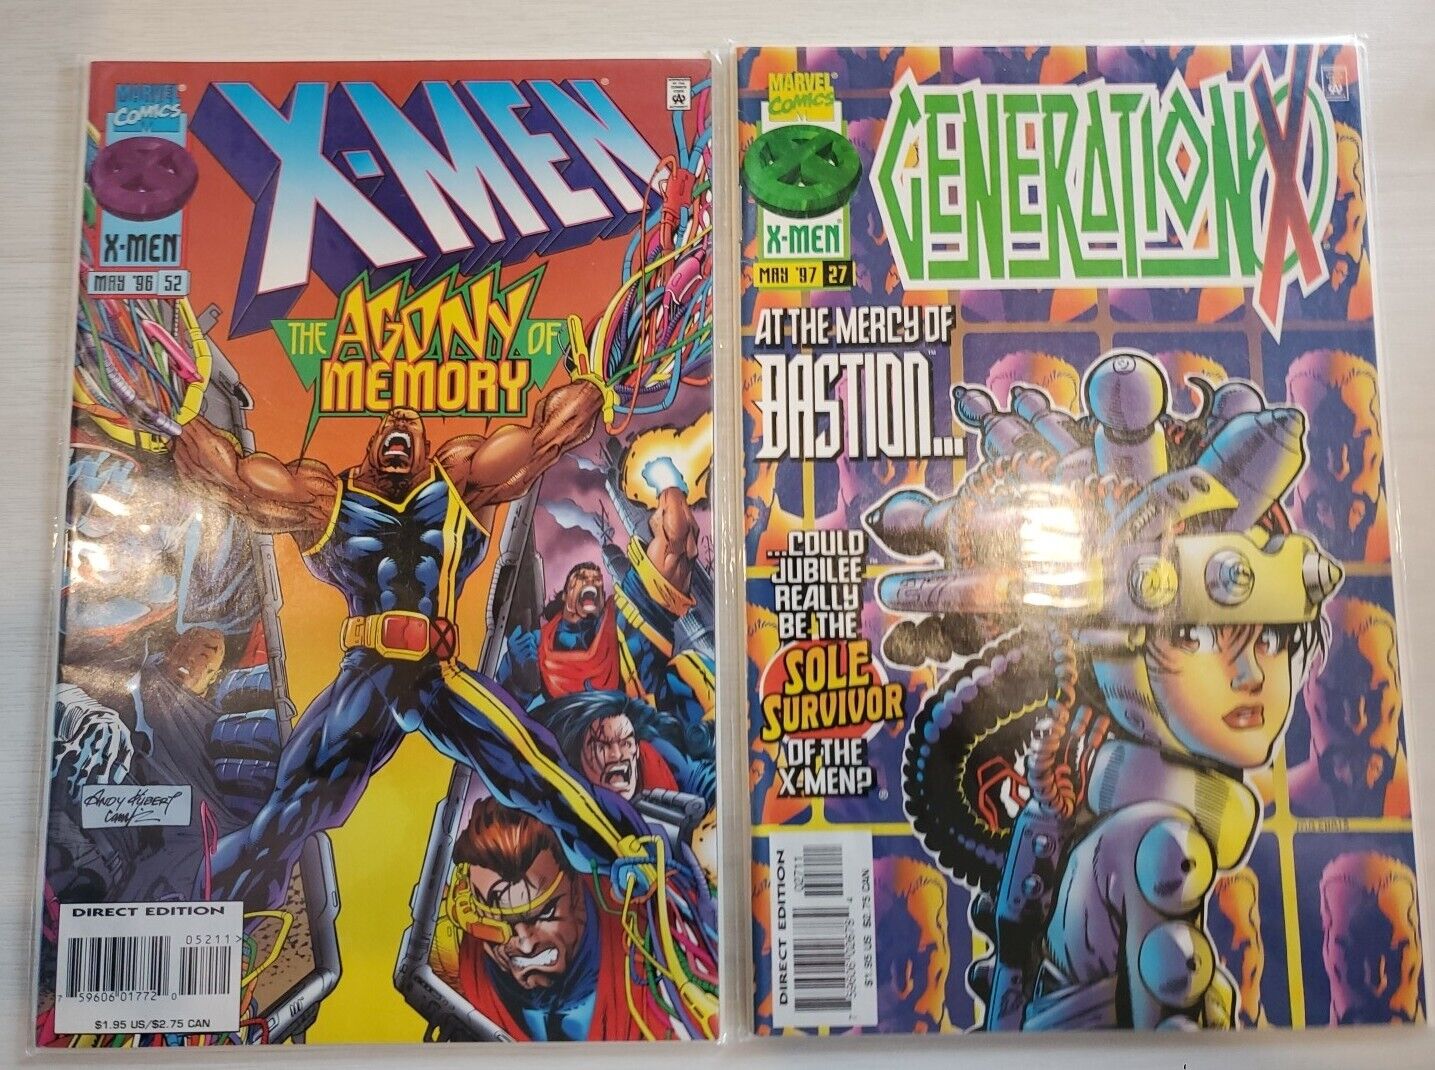 X-MEN #52 & GENERATION X #27 1996 1ST CAMEO APPEARANCE OF BASTION JUBILEE 